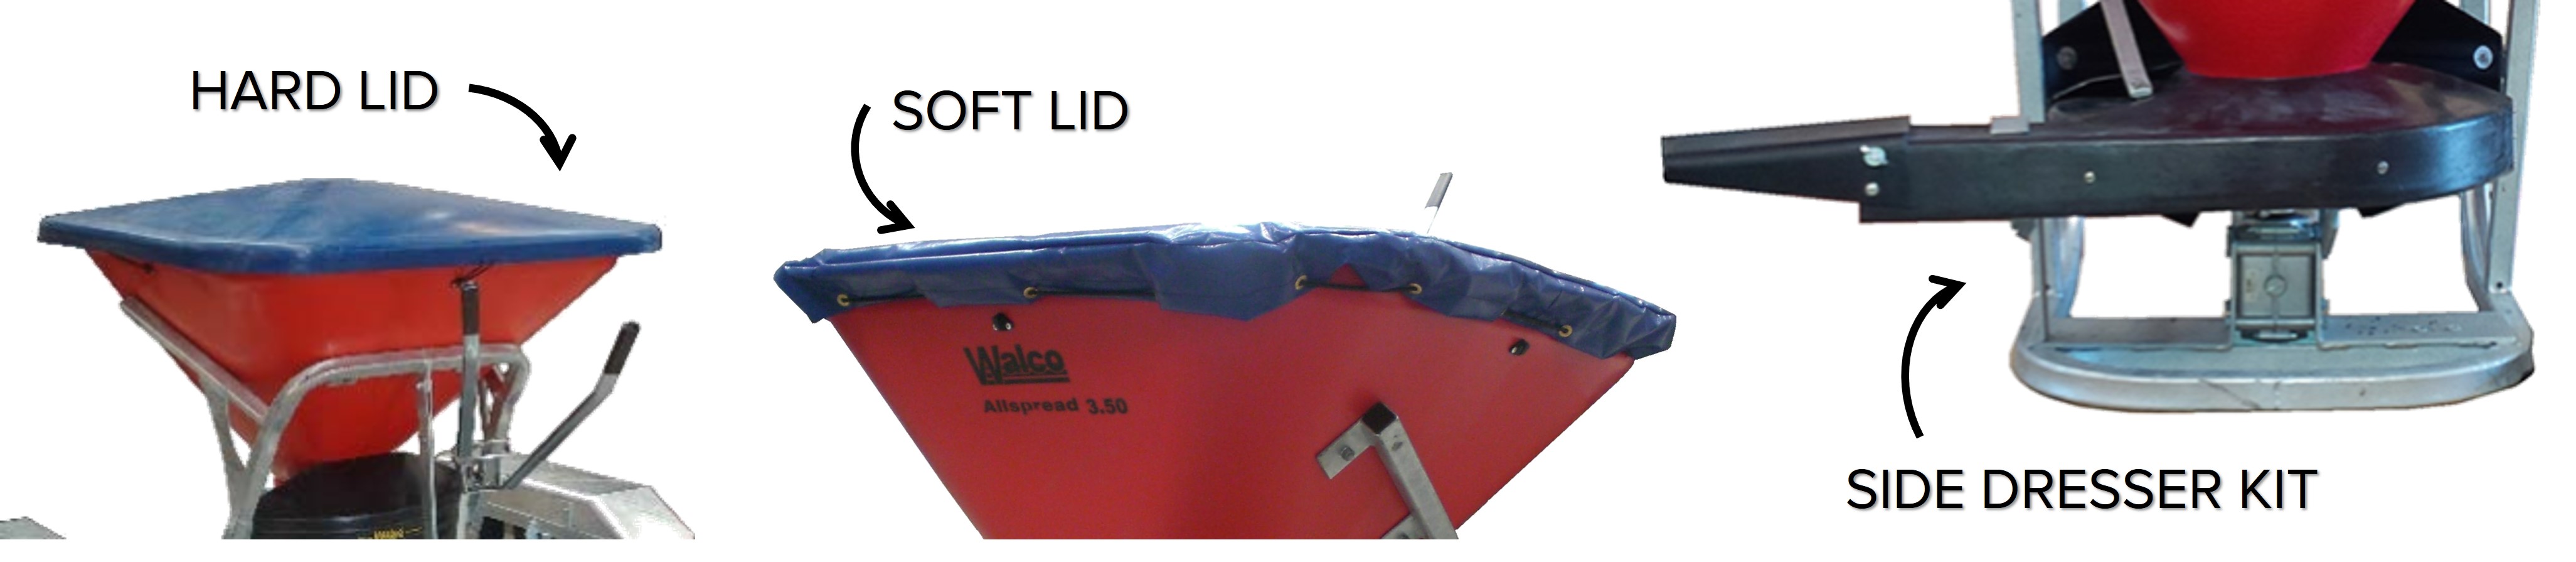 Delmade offers Hard and Soft Lids, and side dresser kits as additional features for Walco Spreaders